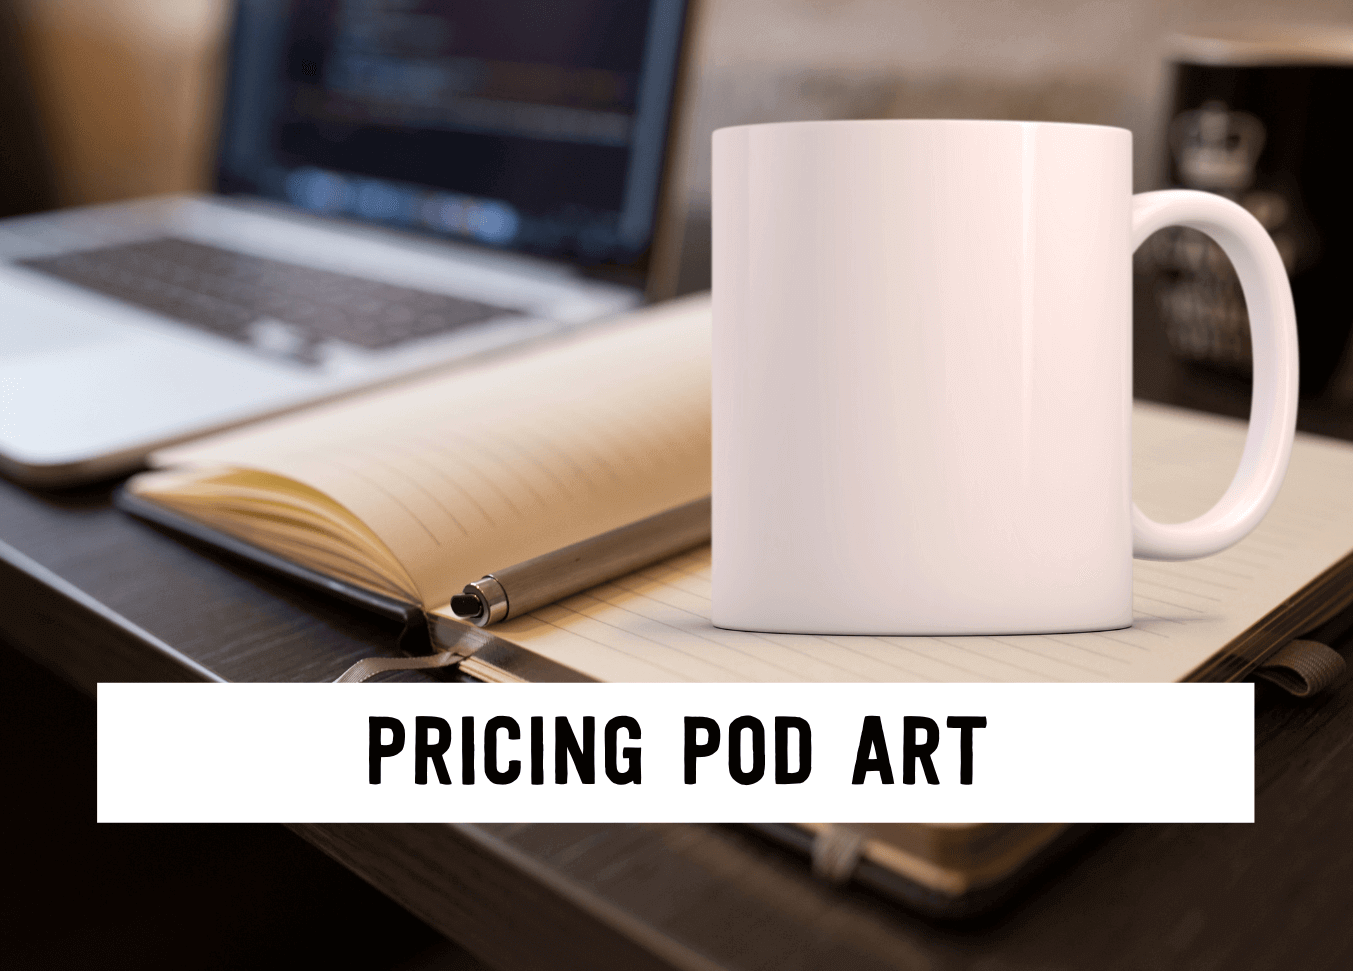 Pricing pod art | Tizzit.co - start and grow a successful handmade business